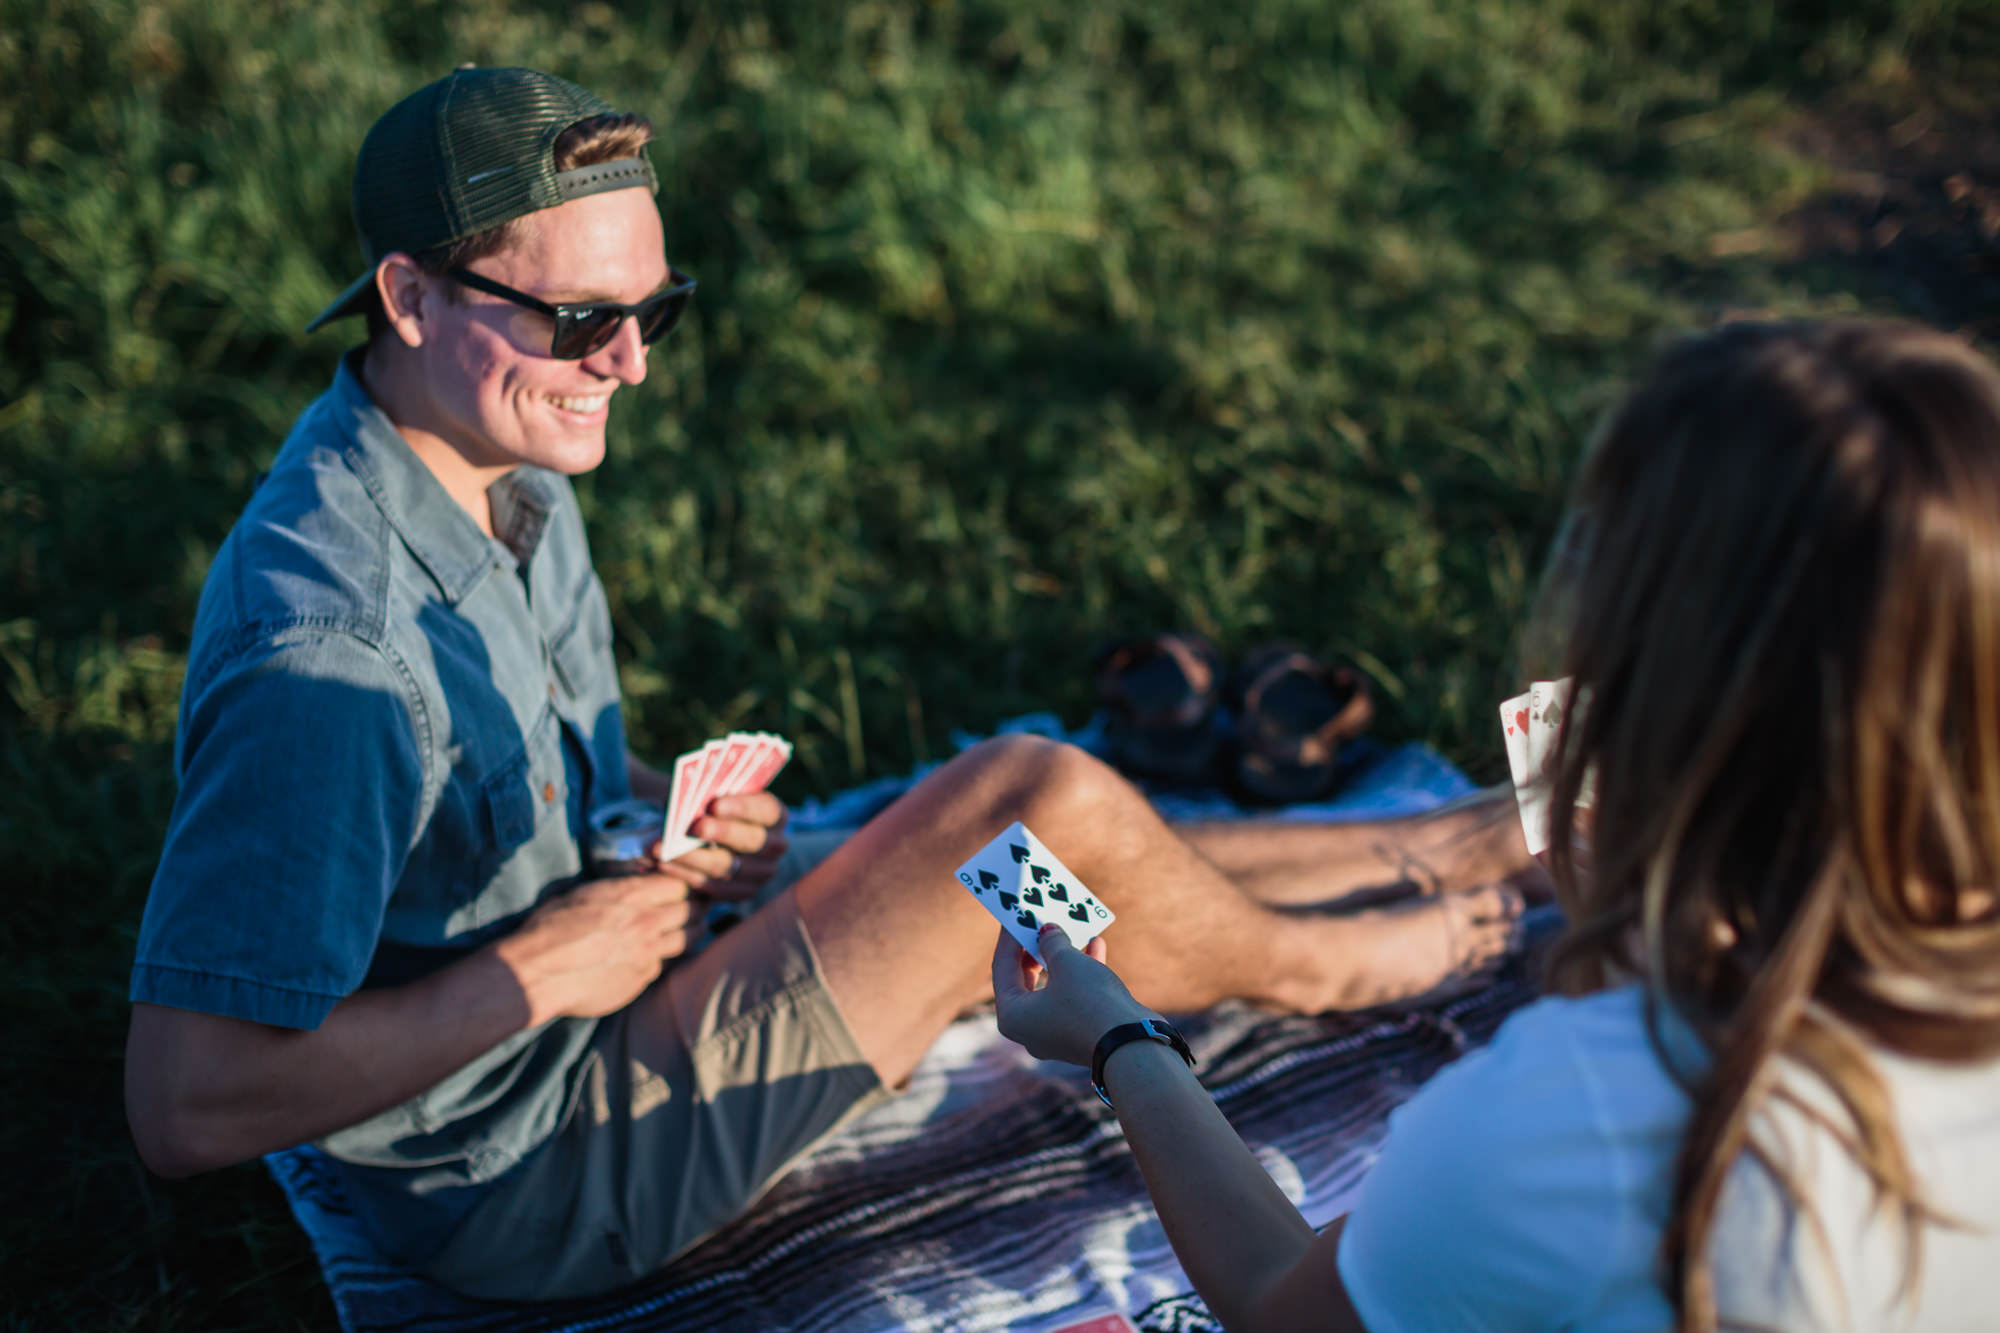 guy in sunglasses playing cards on grassy mountain, Nashville engagement, couples mountain, mountain engagement, couples camping, dog photography, Knoxville, couples hiking, camping with dog, North Carolina hiking, summer engagement photos, Tennessee Photography, Tennessee Photographer, Tennessee Photos, Tennessee Engagement Photography, Tennessee Engagement Photos, Tennessee Engagement Photographer, Tennessee Portrait Photographer, Nashville Engagement Photographer, Nashville Engagement Photos, Knoxville Engagement, Nashville Lifestyle Photographer, Nashville Lifestyle Photography, Nashville Lifestyle Photos, Creative Portraits